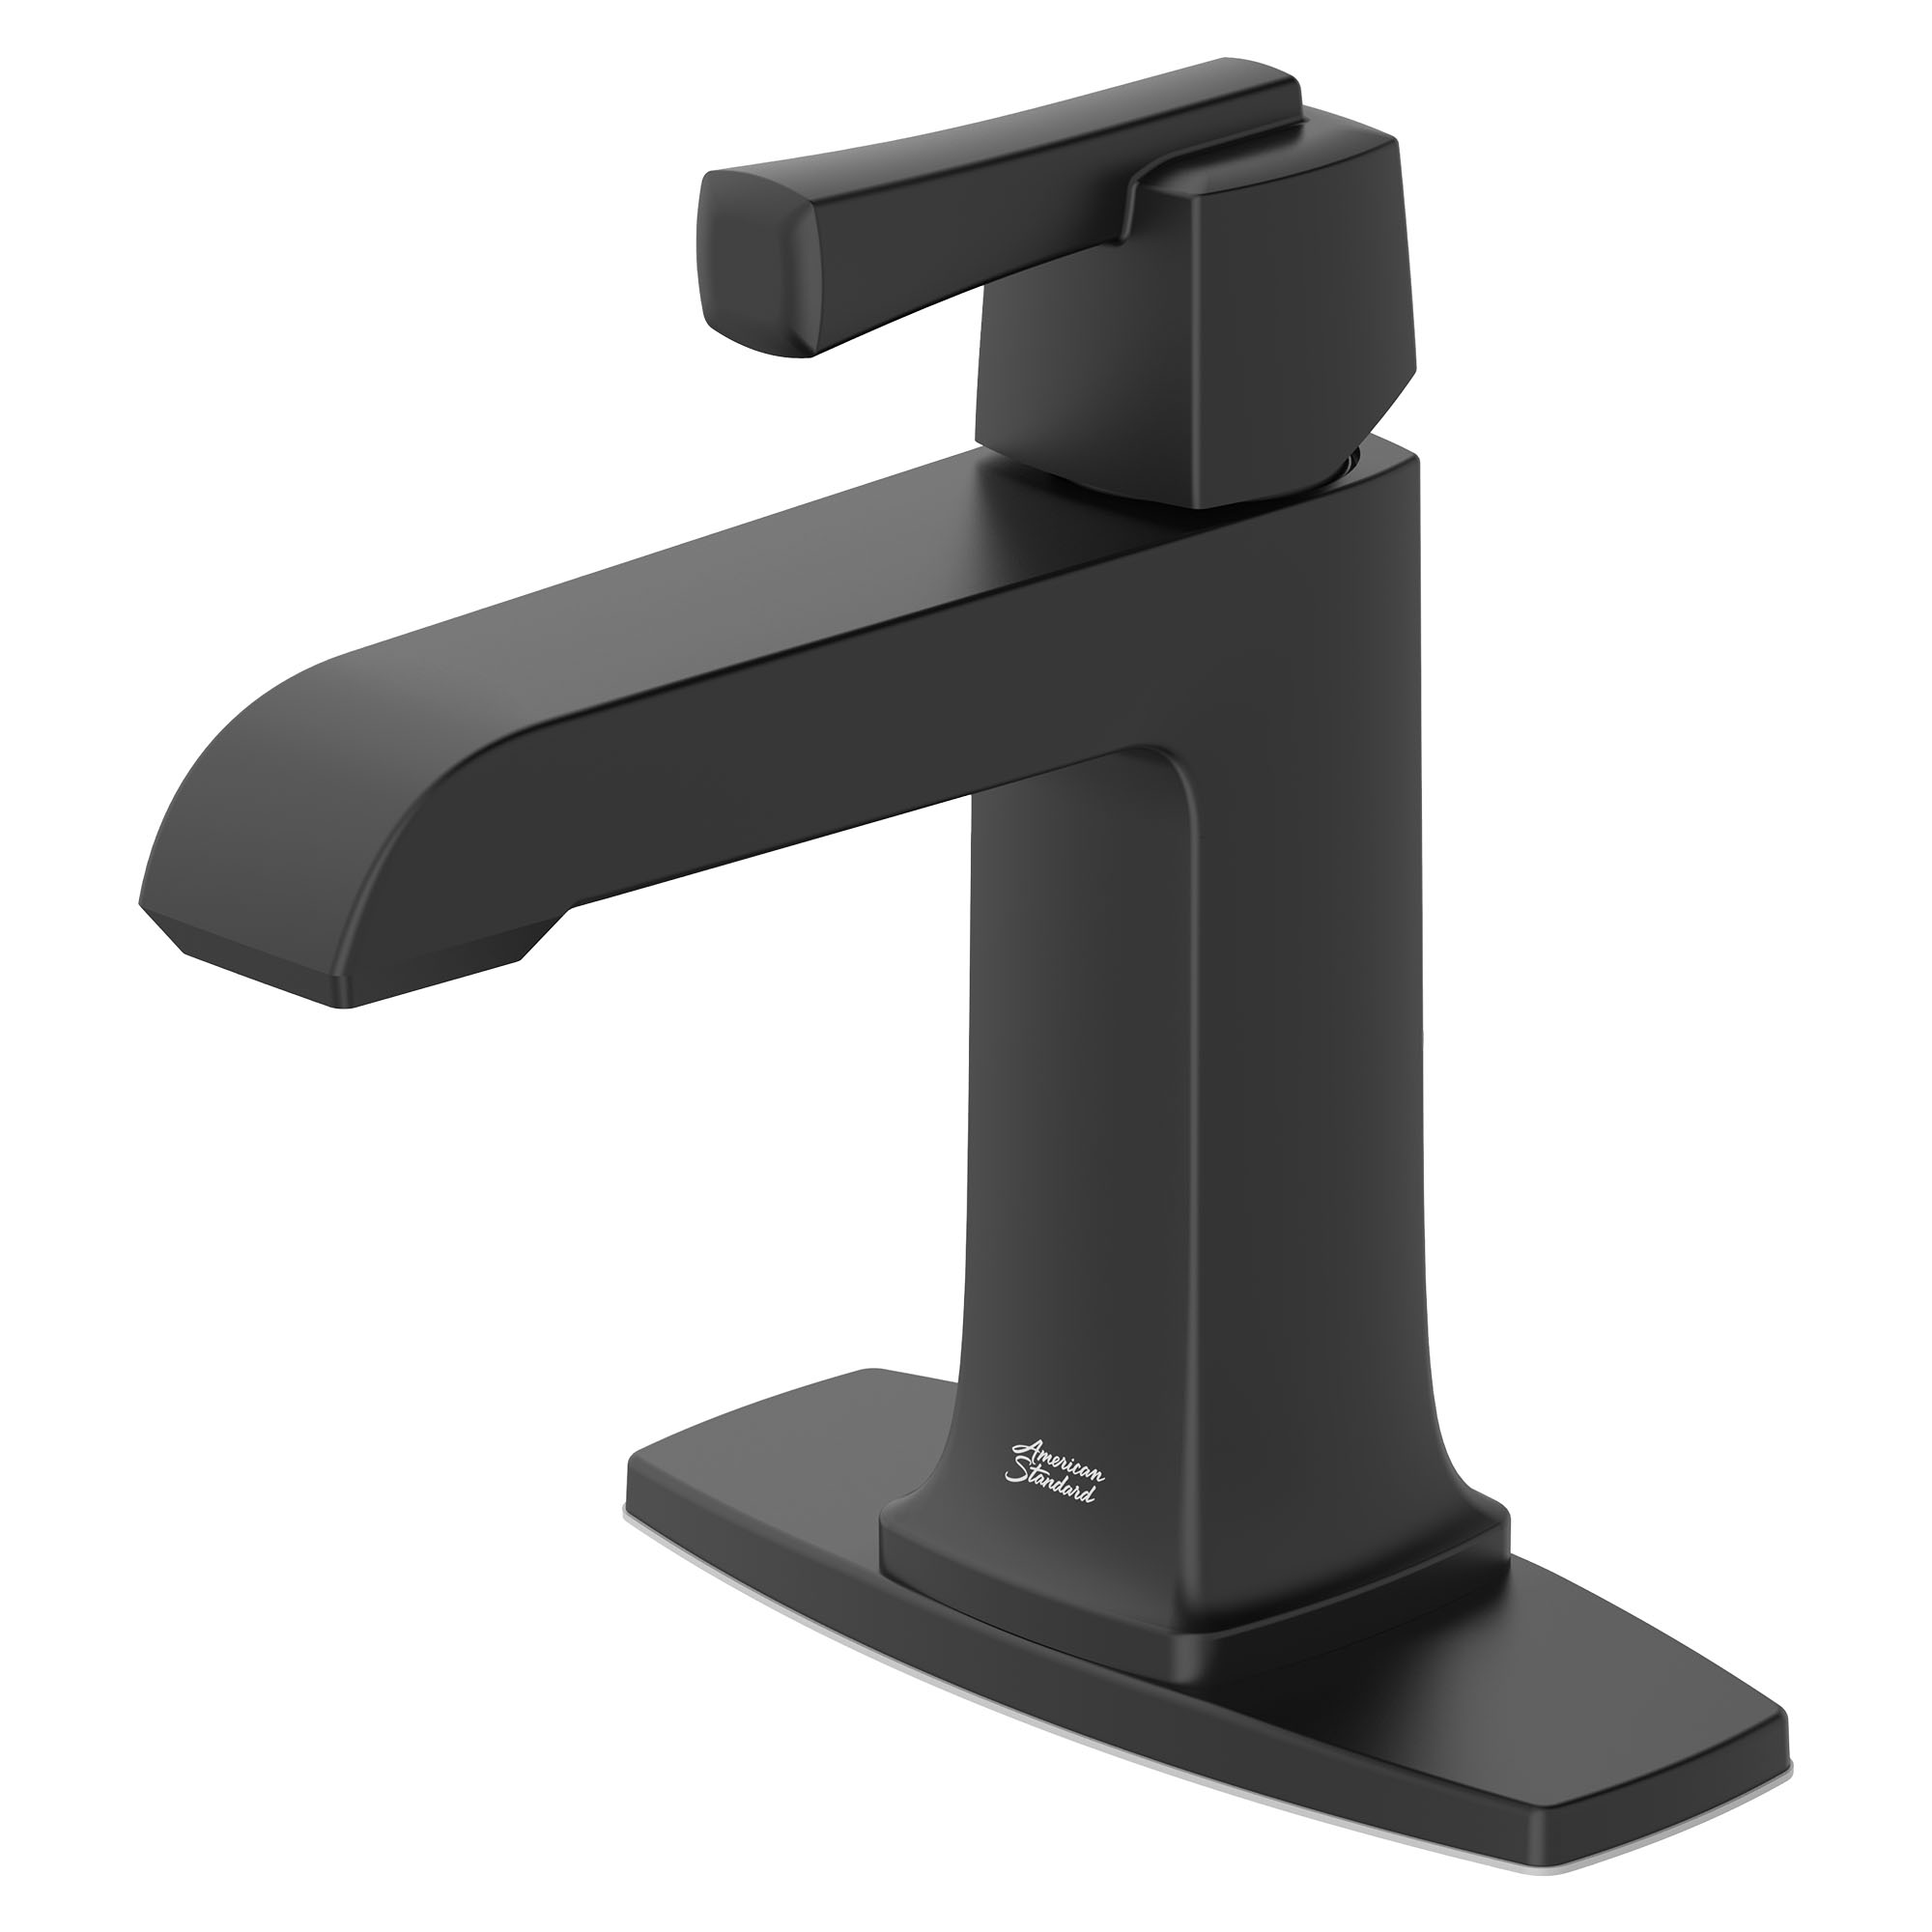 Townsend® Single Hole Single-Handle Bathroom Faucet 1.2 gpm/4.5 L/min With Lever Handle